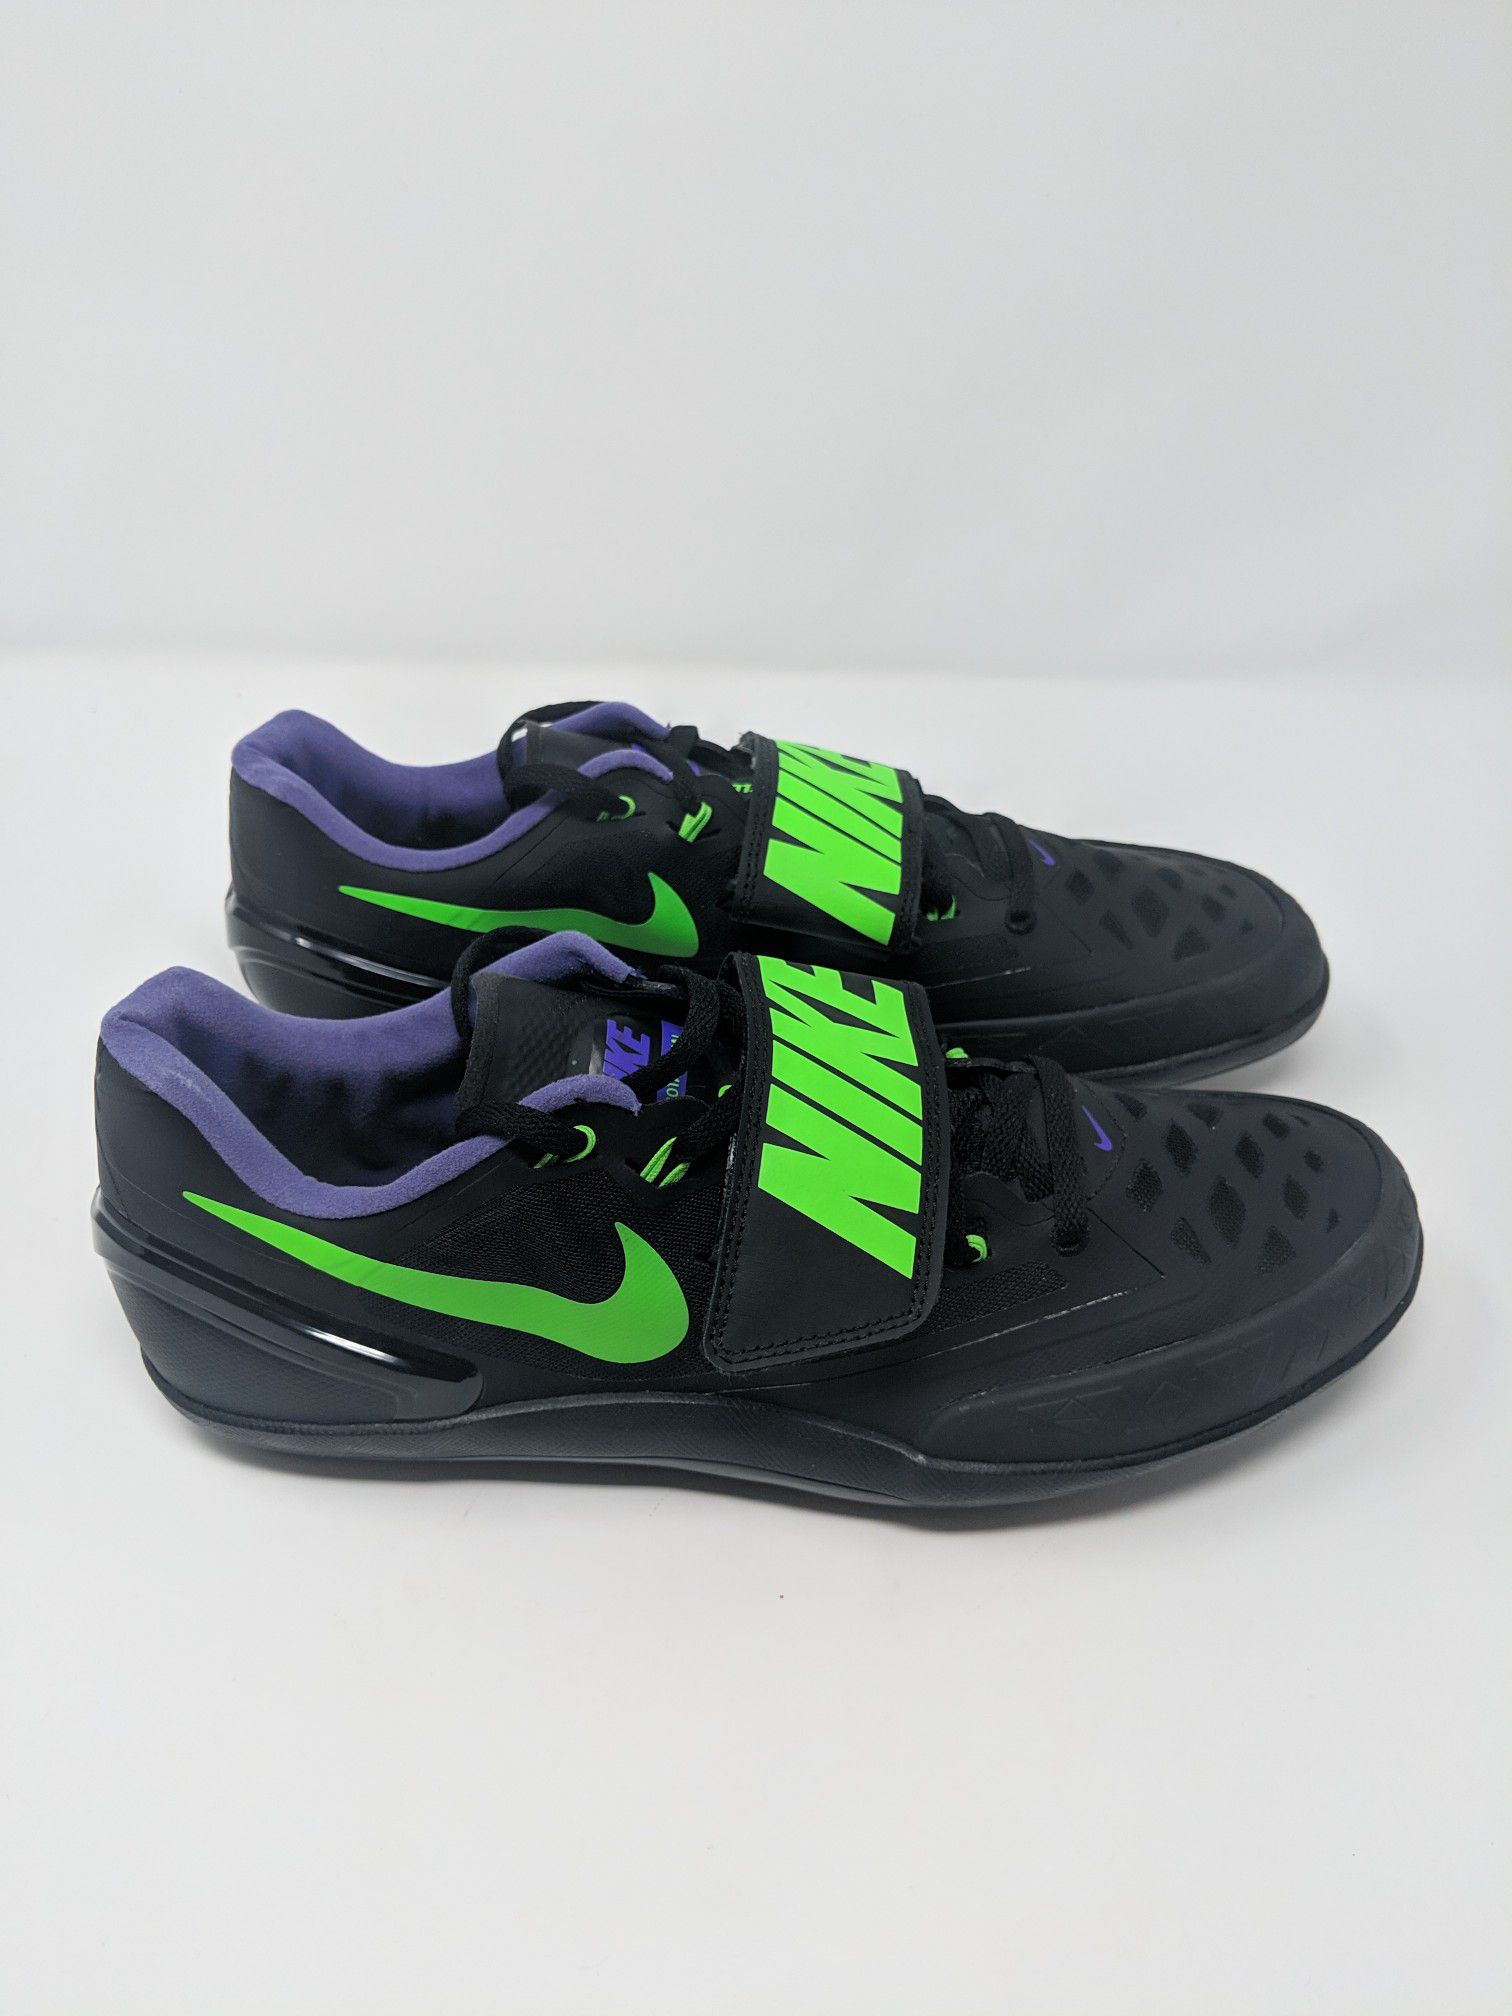 NEW NIKE ROTATIONAL Sz 11 & Field Shot Put Discus Style code 685131-035 for Sale in Duluth, MN - OfferUp